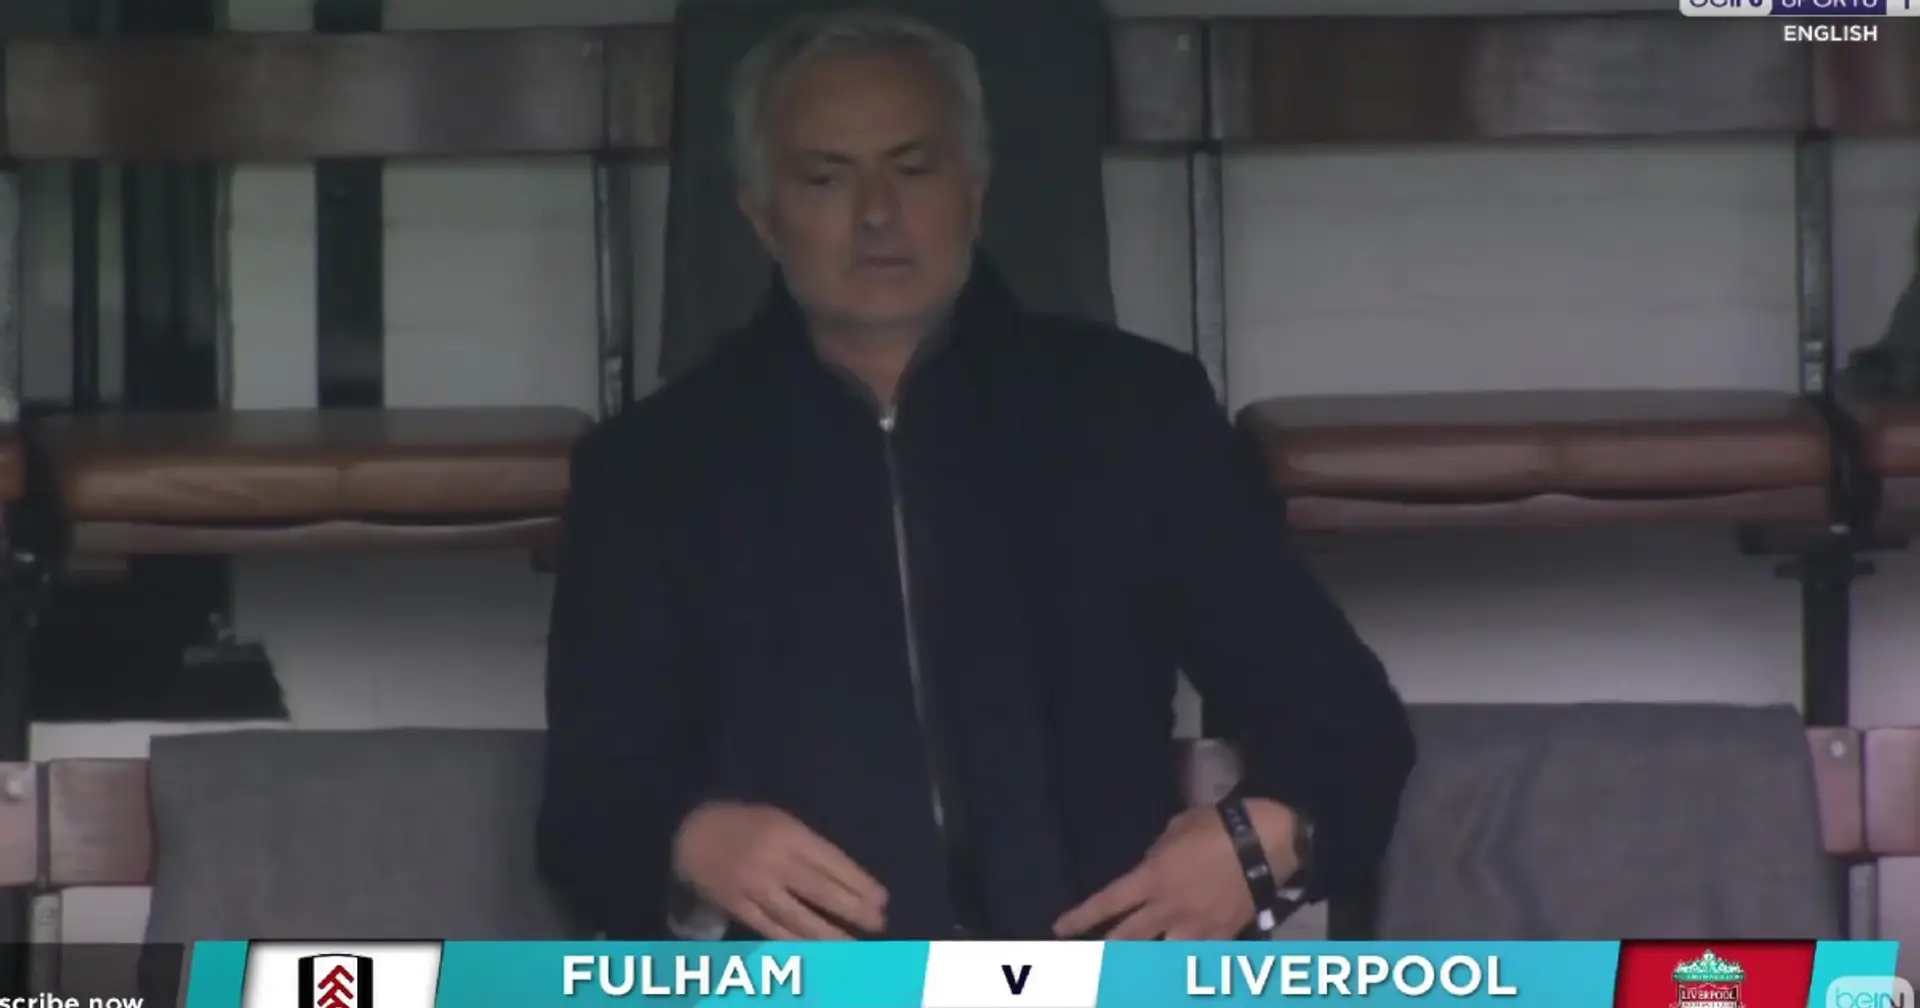 'Dear God please no': Jose Mourinho spotted in attendance for Liverpool game, fans react